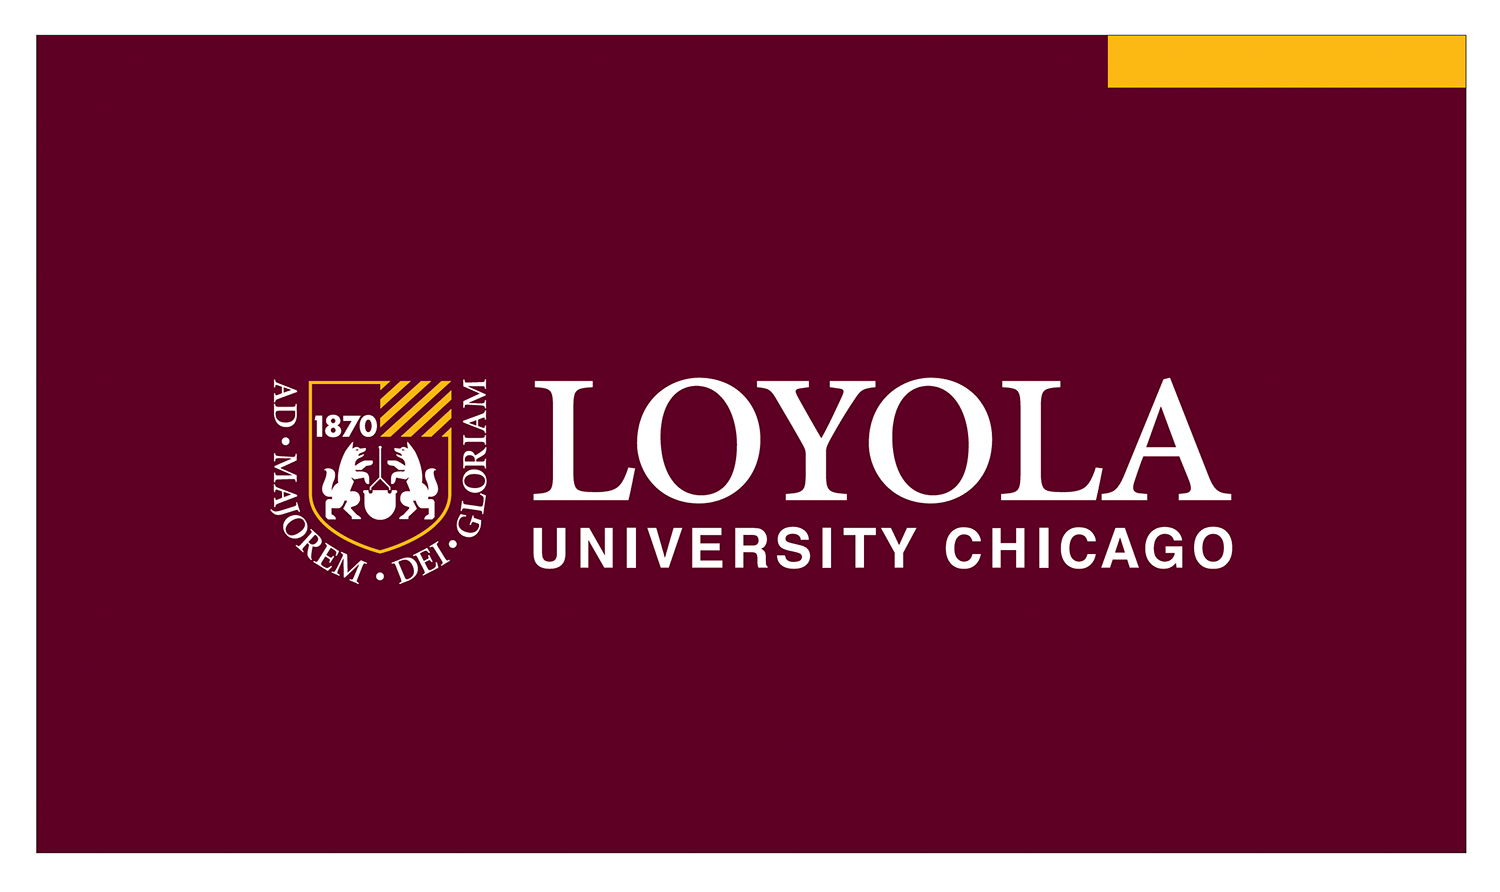 An example of the back of a Loyola University Chicago business card. It's a fully maroon background with the Loyola University Chicago logo in the center